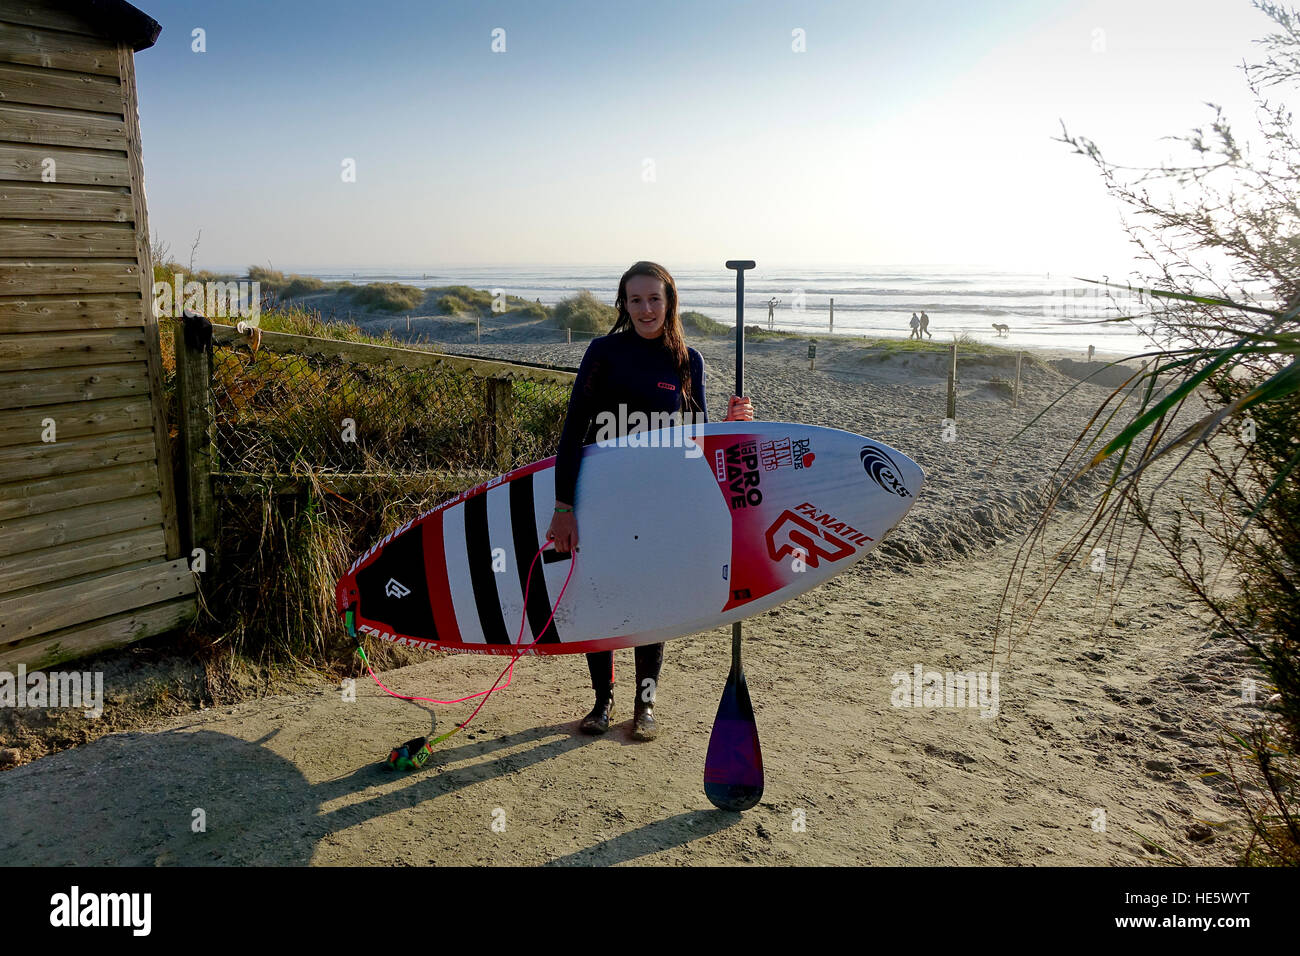 UK Weather 17th December 2016: Foggy conditions gave way to warm and sunny conditions at West Wittering Beach in West Sussex. UK women's paddle boarding champion, Holly Bassett, enjoying the conditions.. © james jagger/Alamy Live News Stock Photo